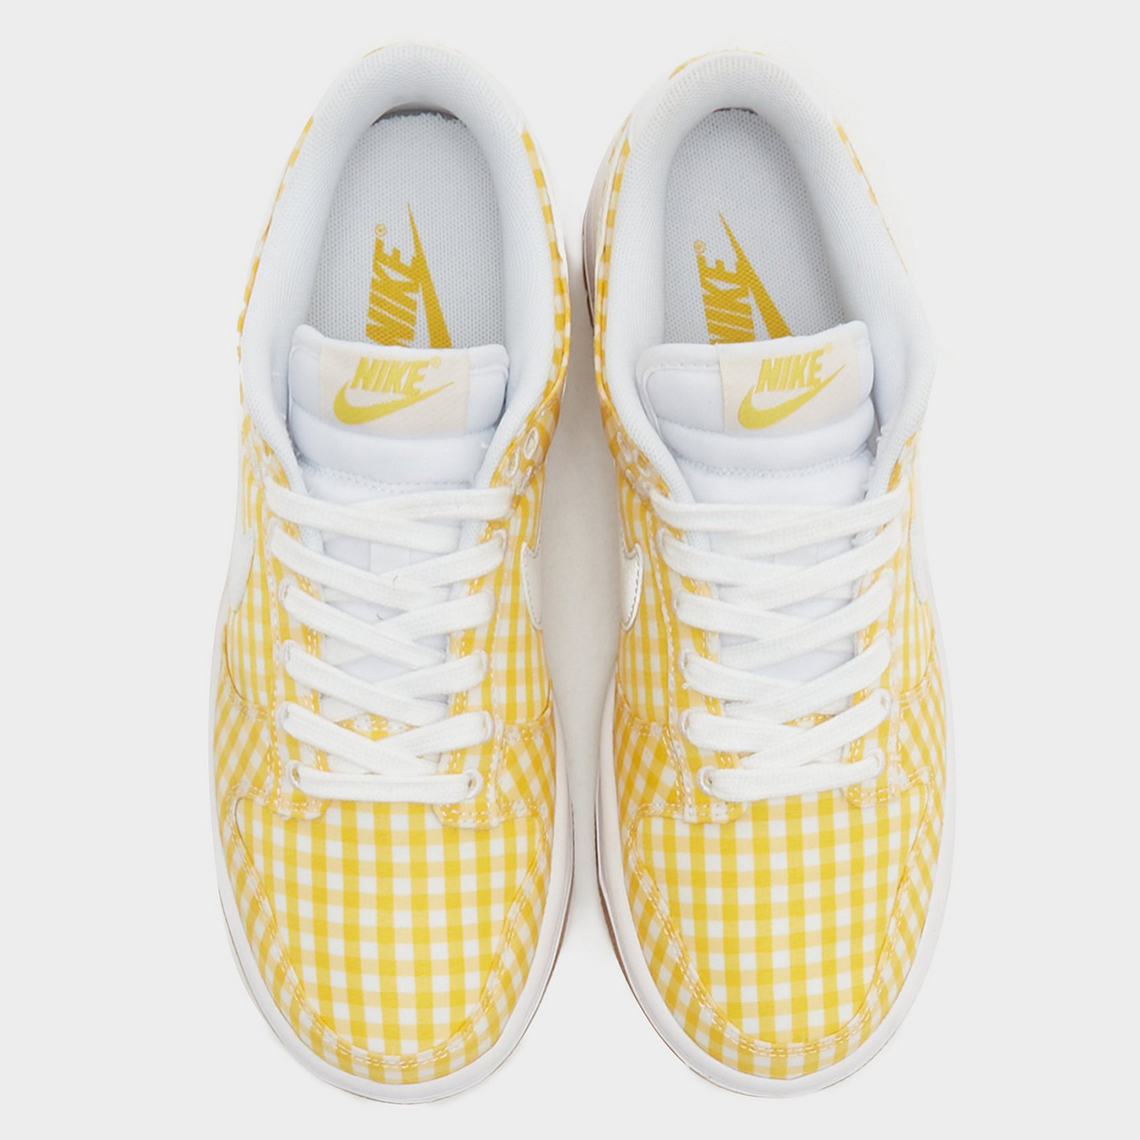 nike year of the dragon shoe for women clearance Yellow Gingham Gum Sole 1